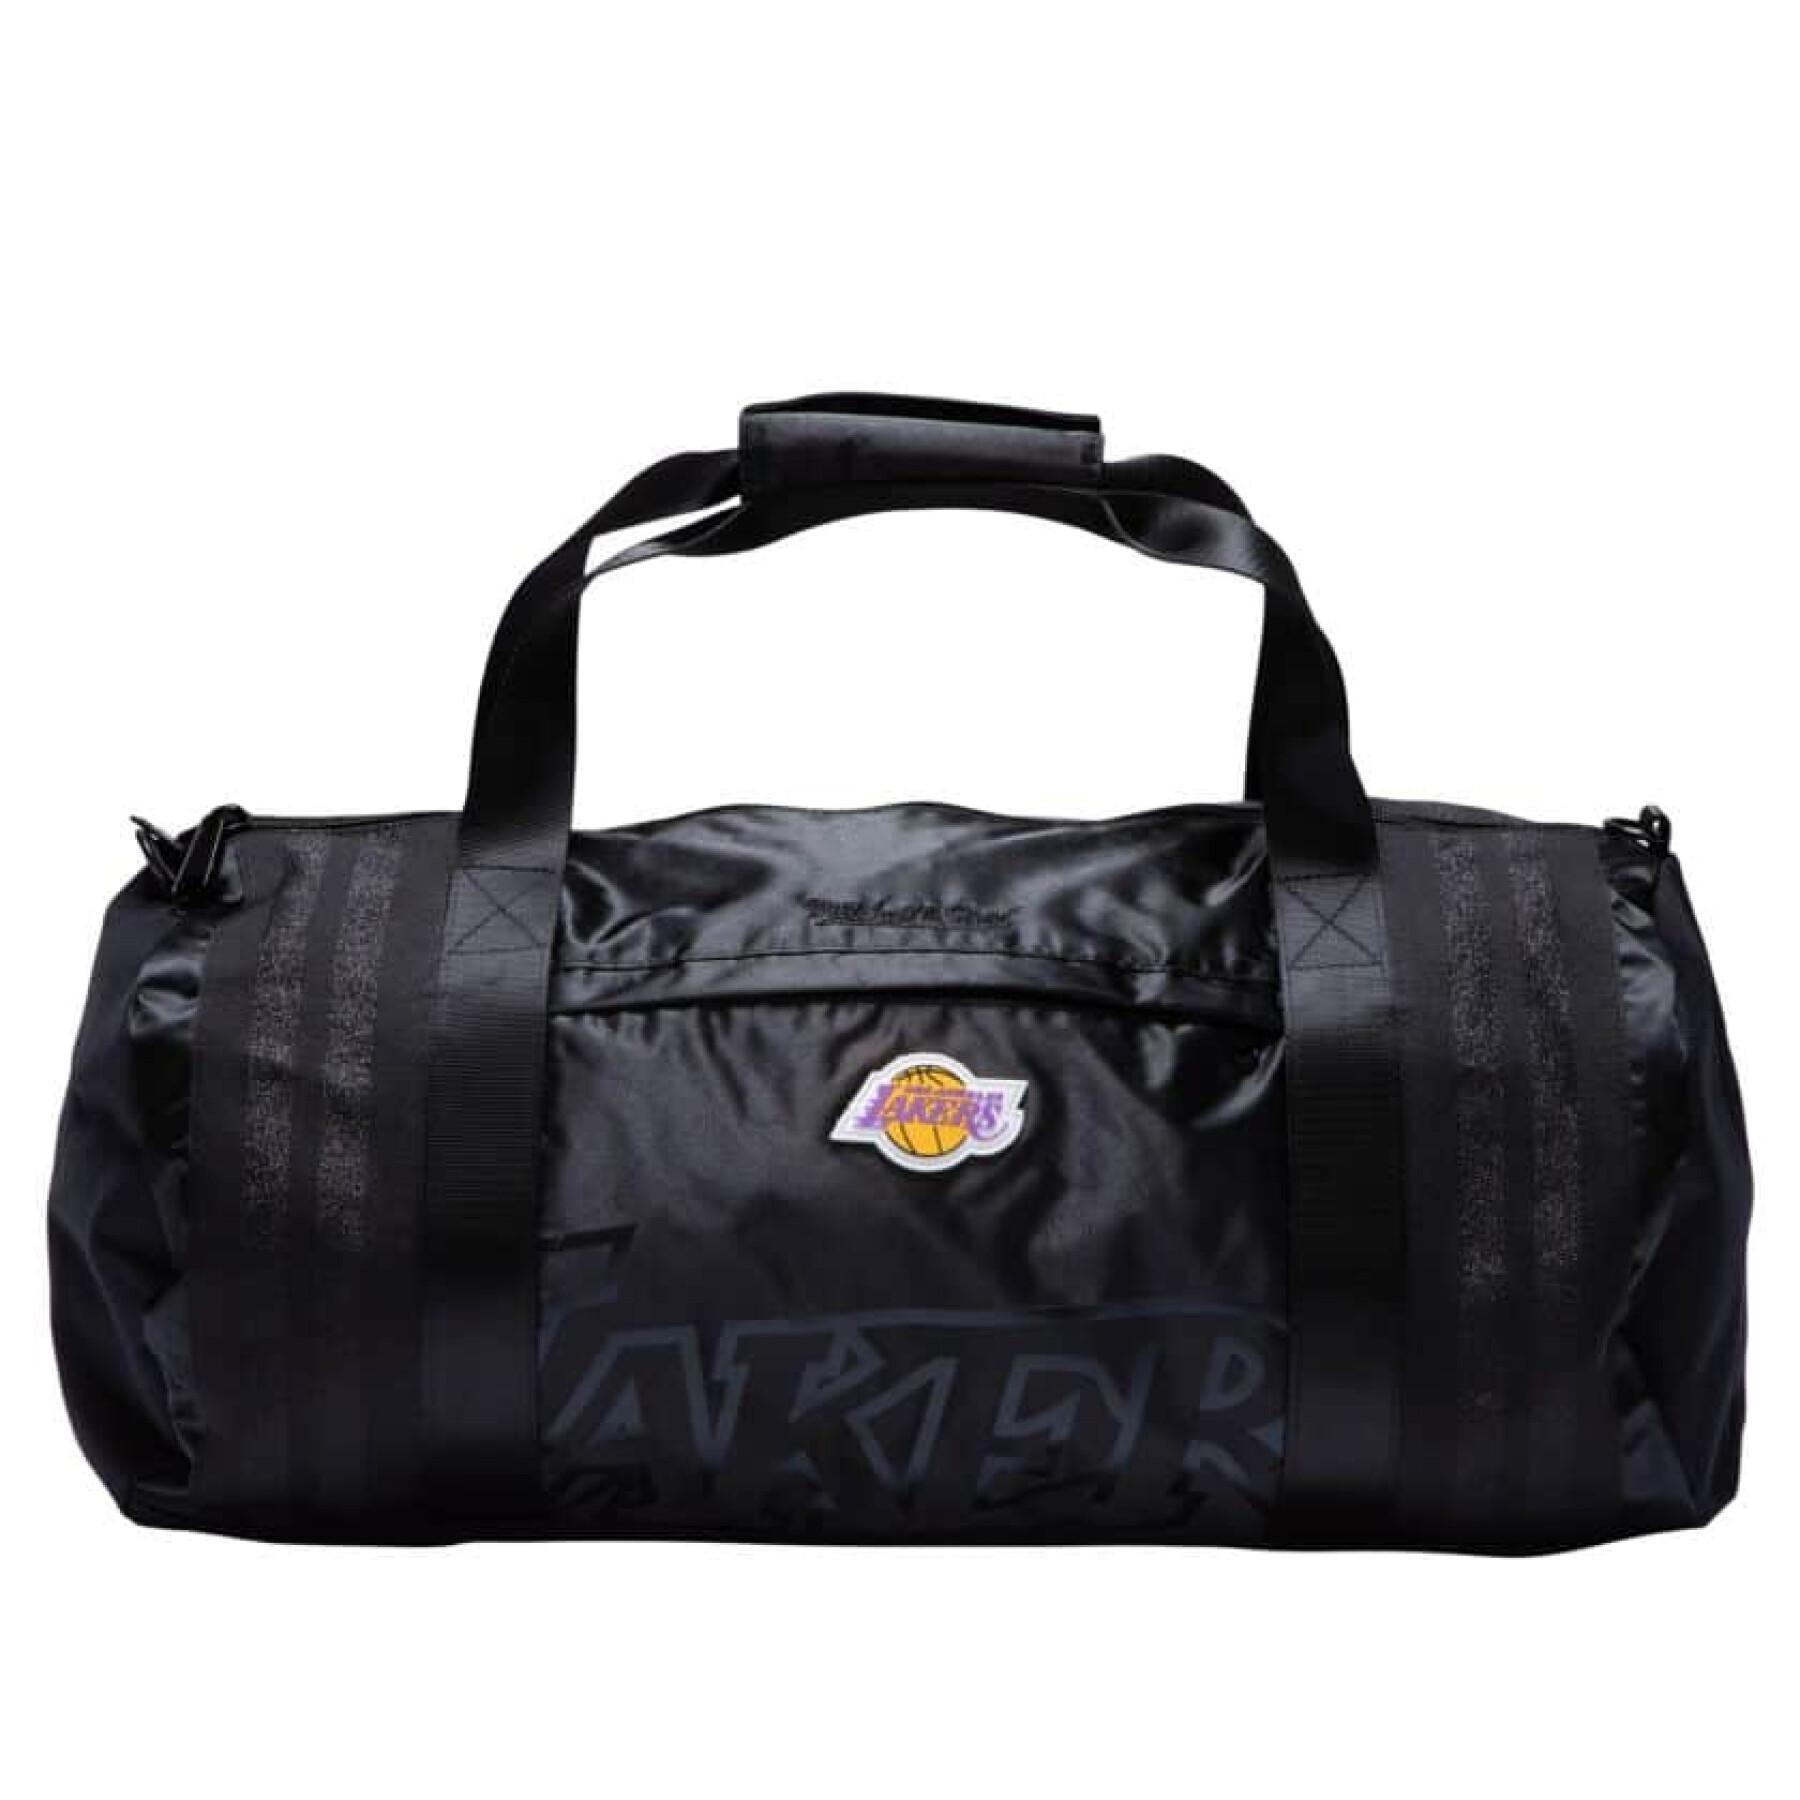 Sports bag Los Angeles Lakers 2021/22